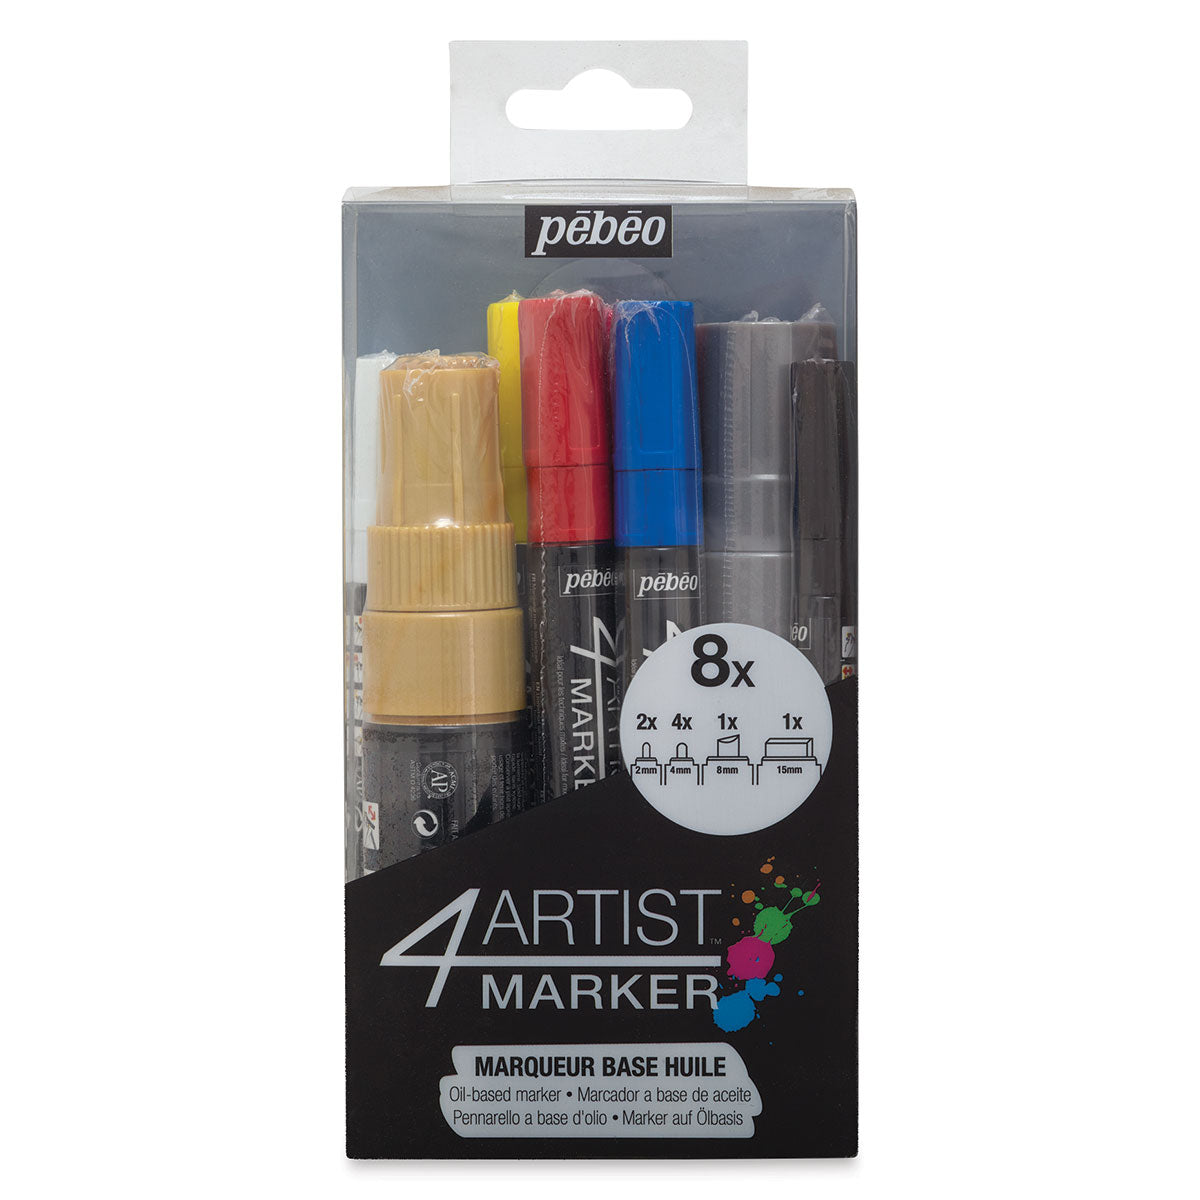 PEBEO 4Artist Marker Assorted Colours Set of 8